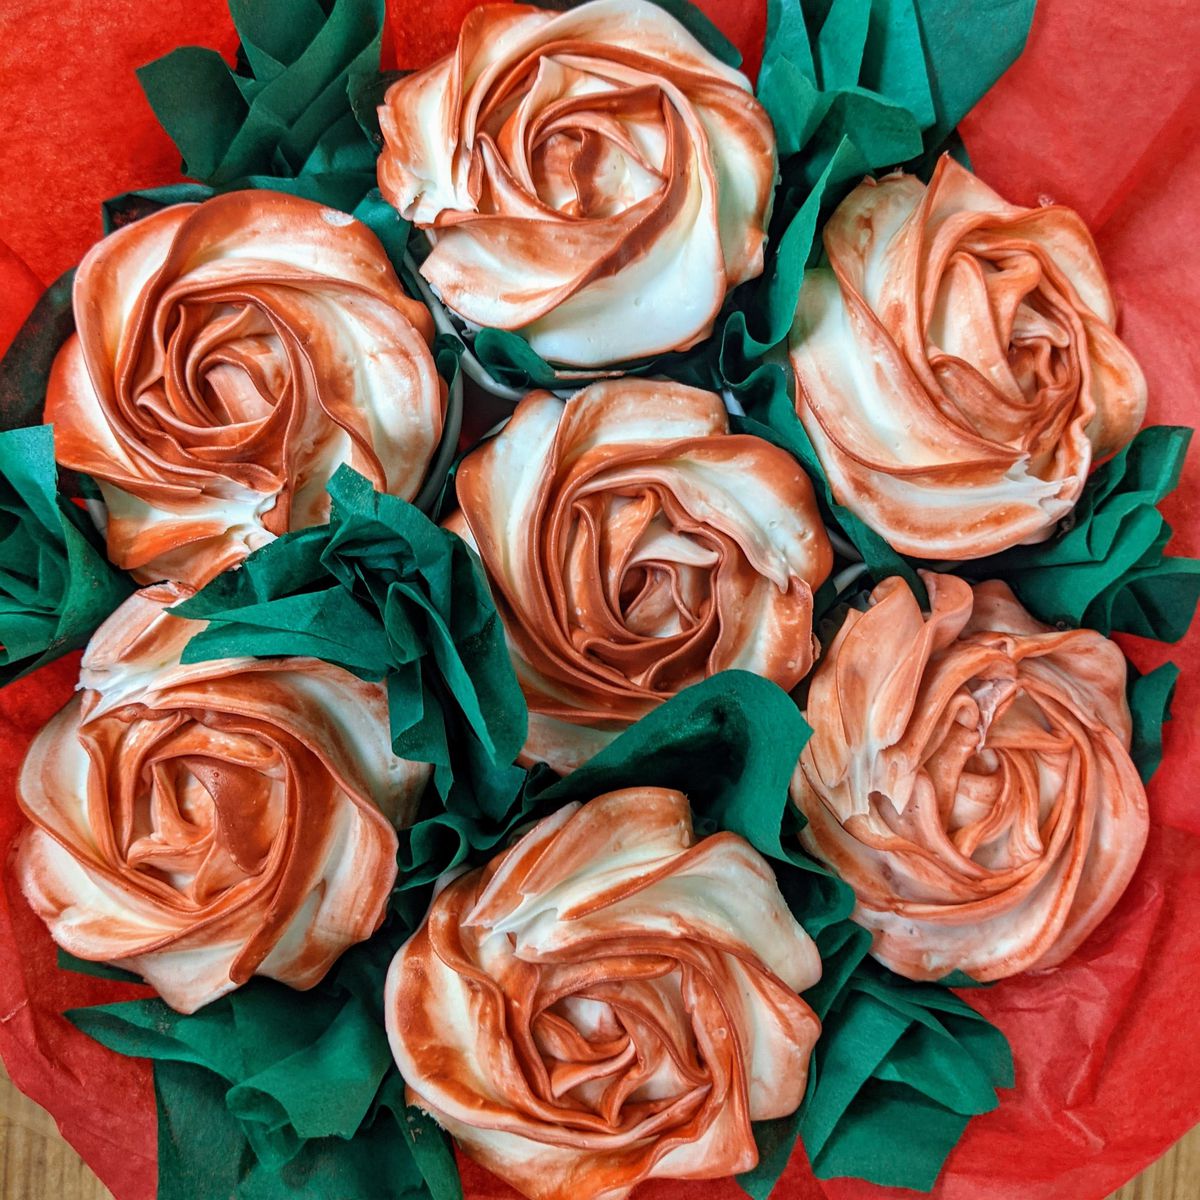 Seven cupcakes in a circle decorated to look like roses.